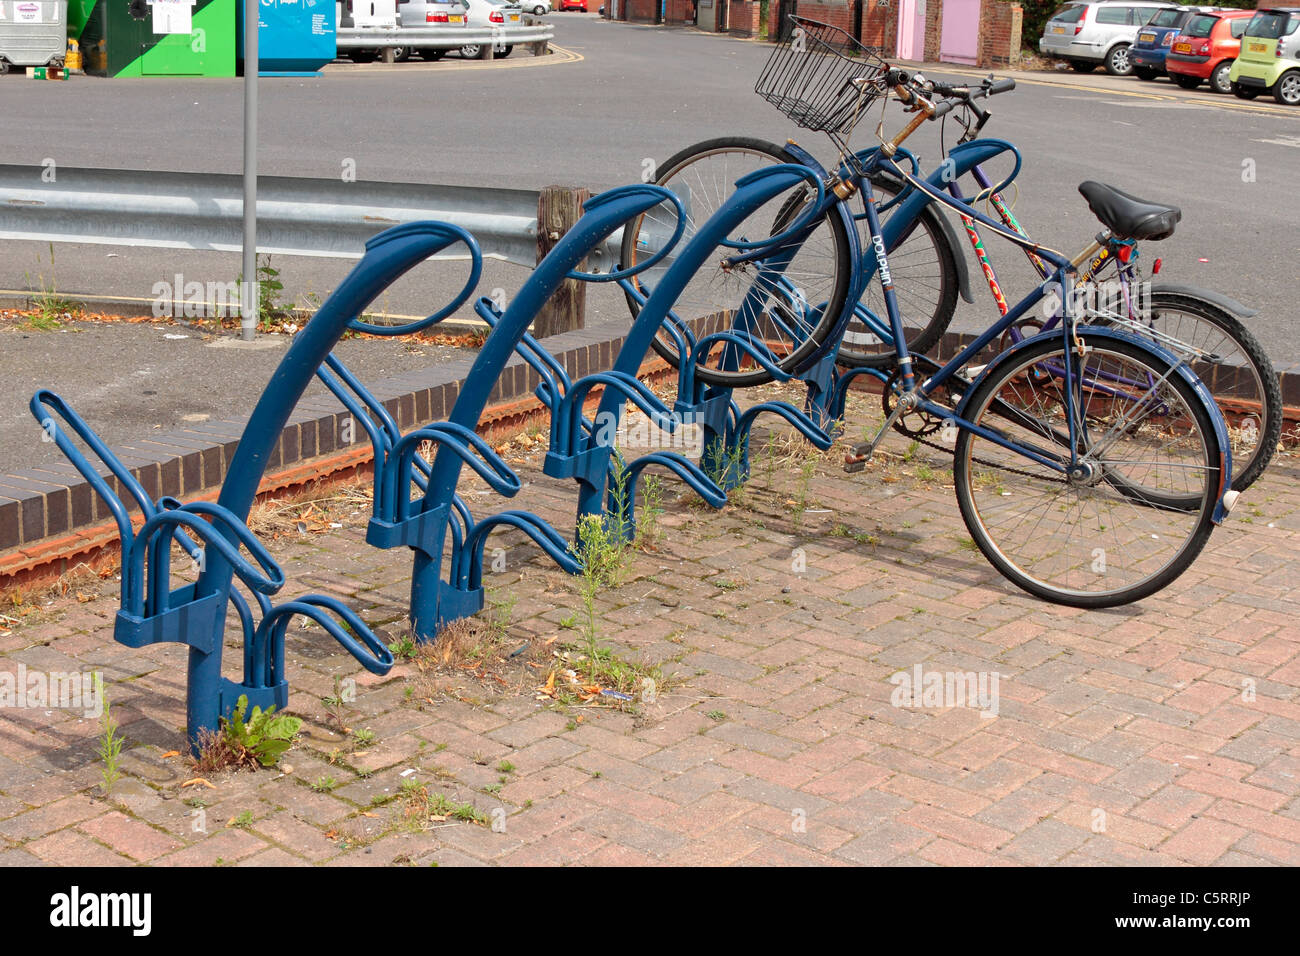 Cycle stand in Selby Back Micklegate car park. Stock Photo